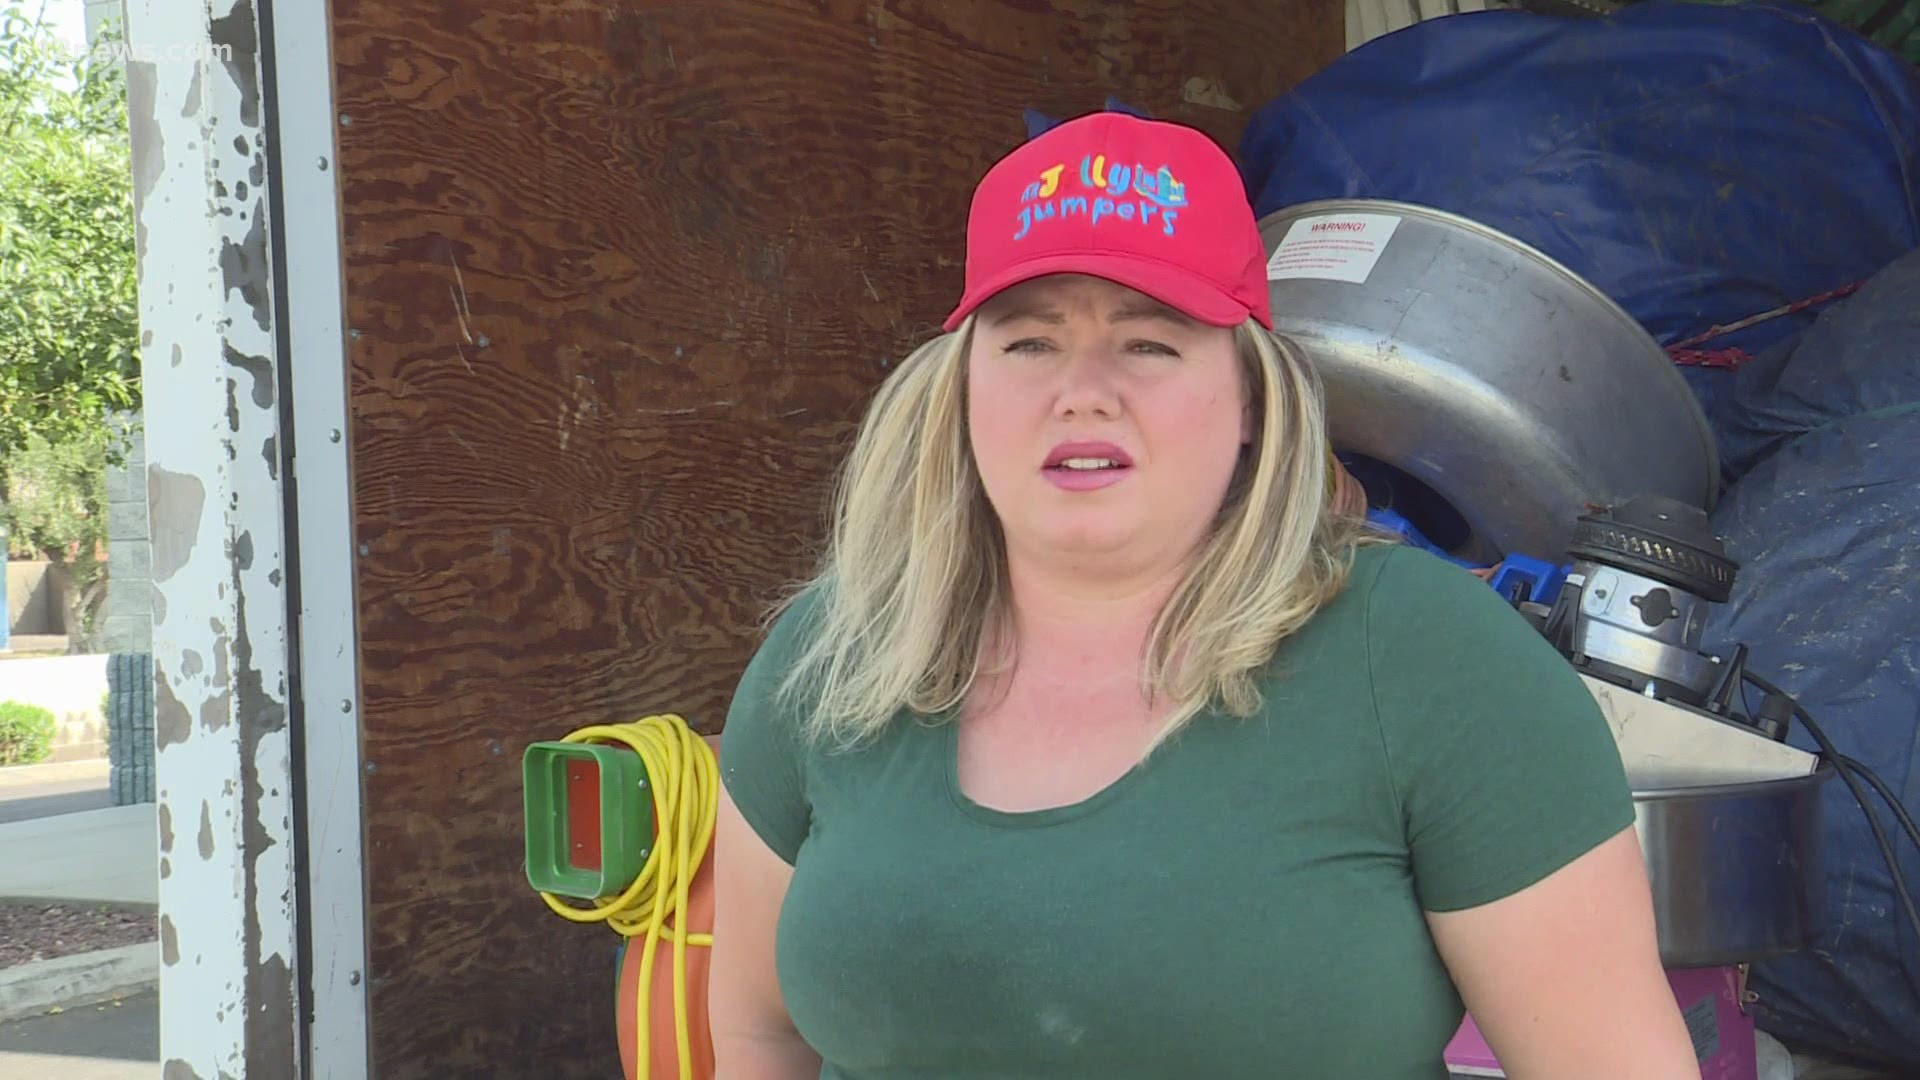 A multi-state bounce house theft ring was busted thanks to a Valley bounce house business owner. She helped track the suspects down and get them arrested.